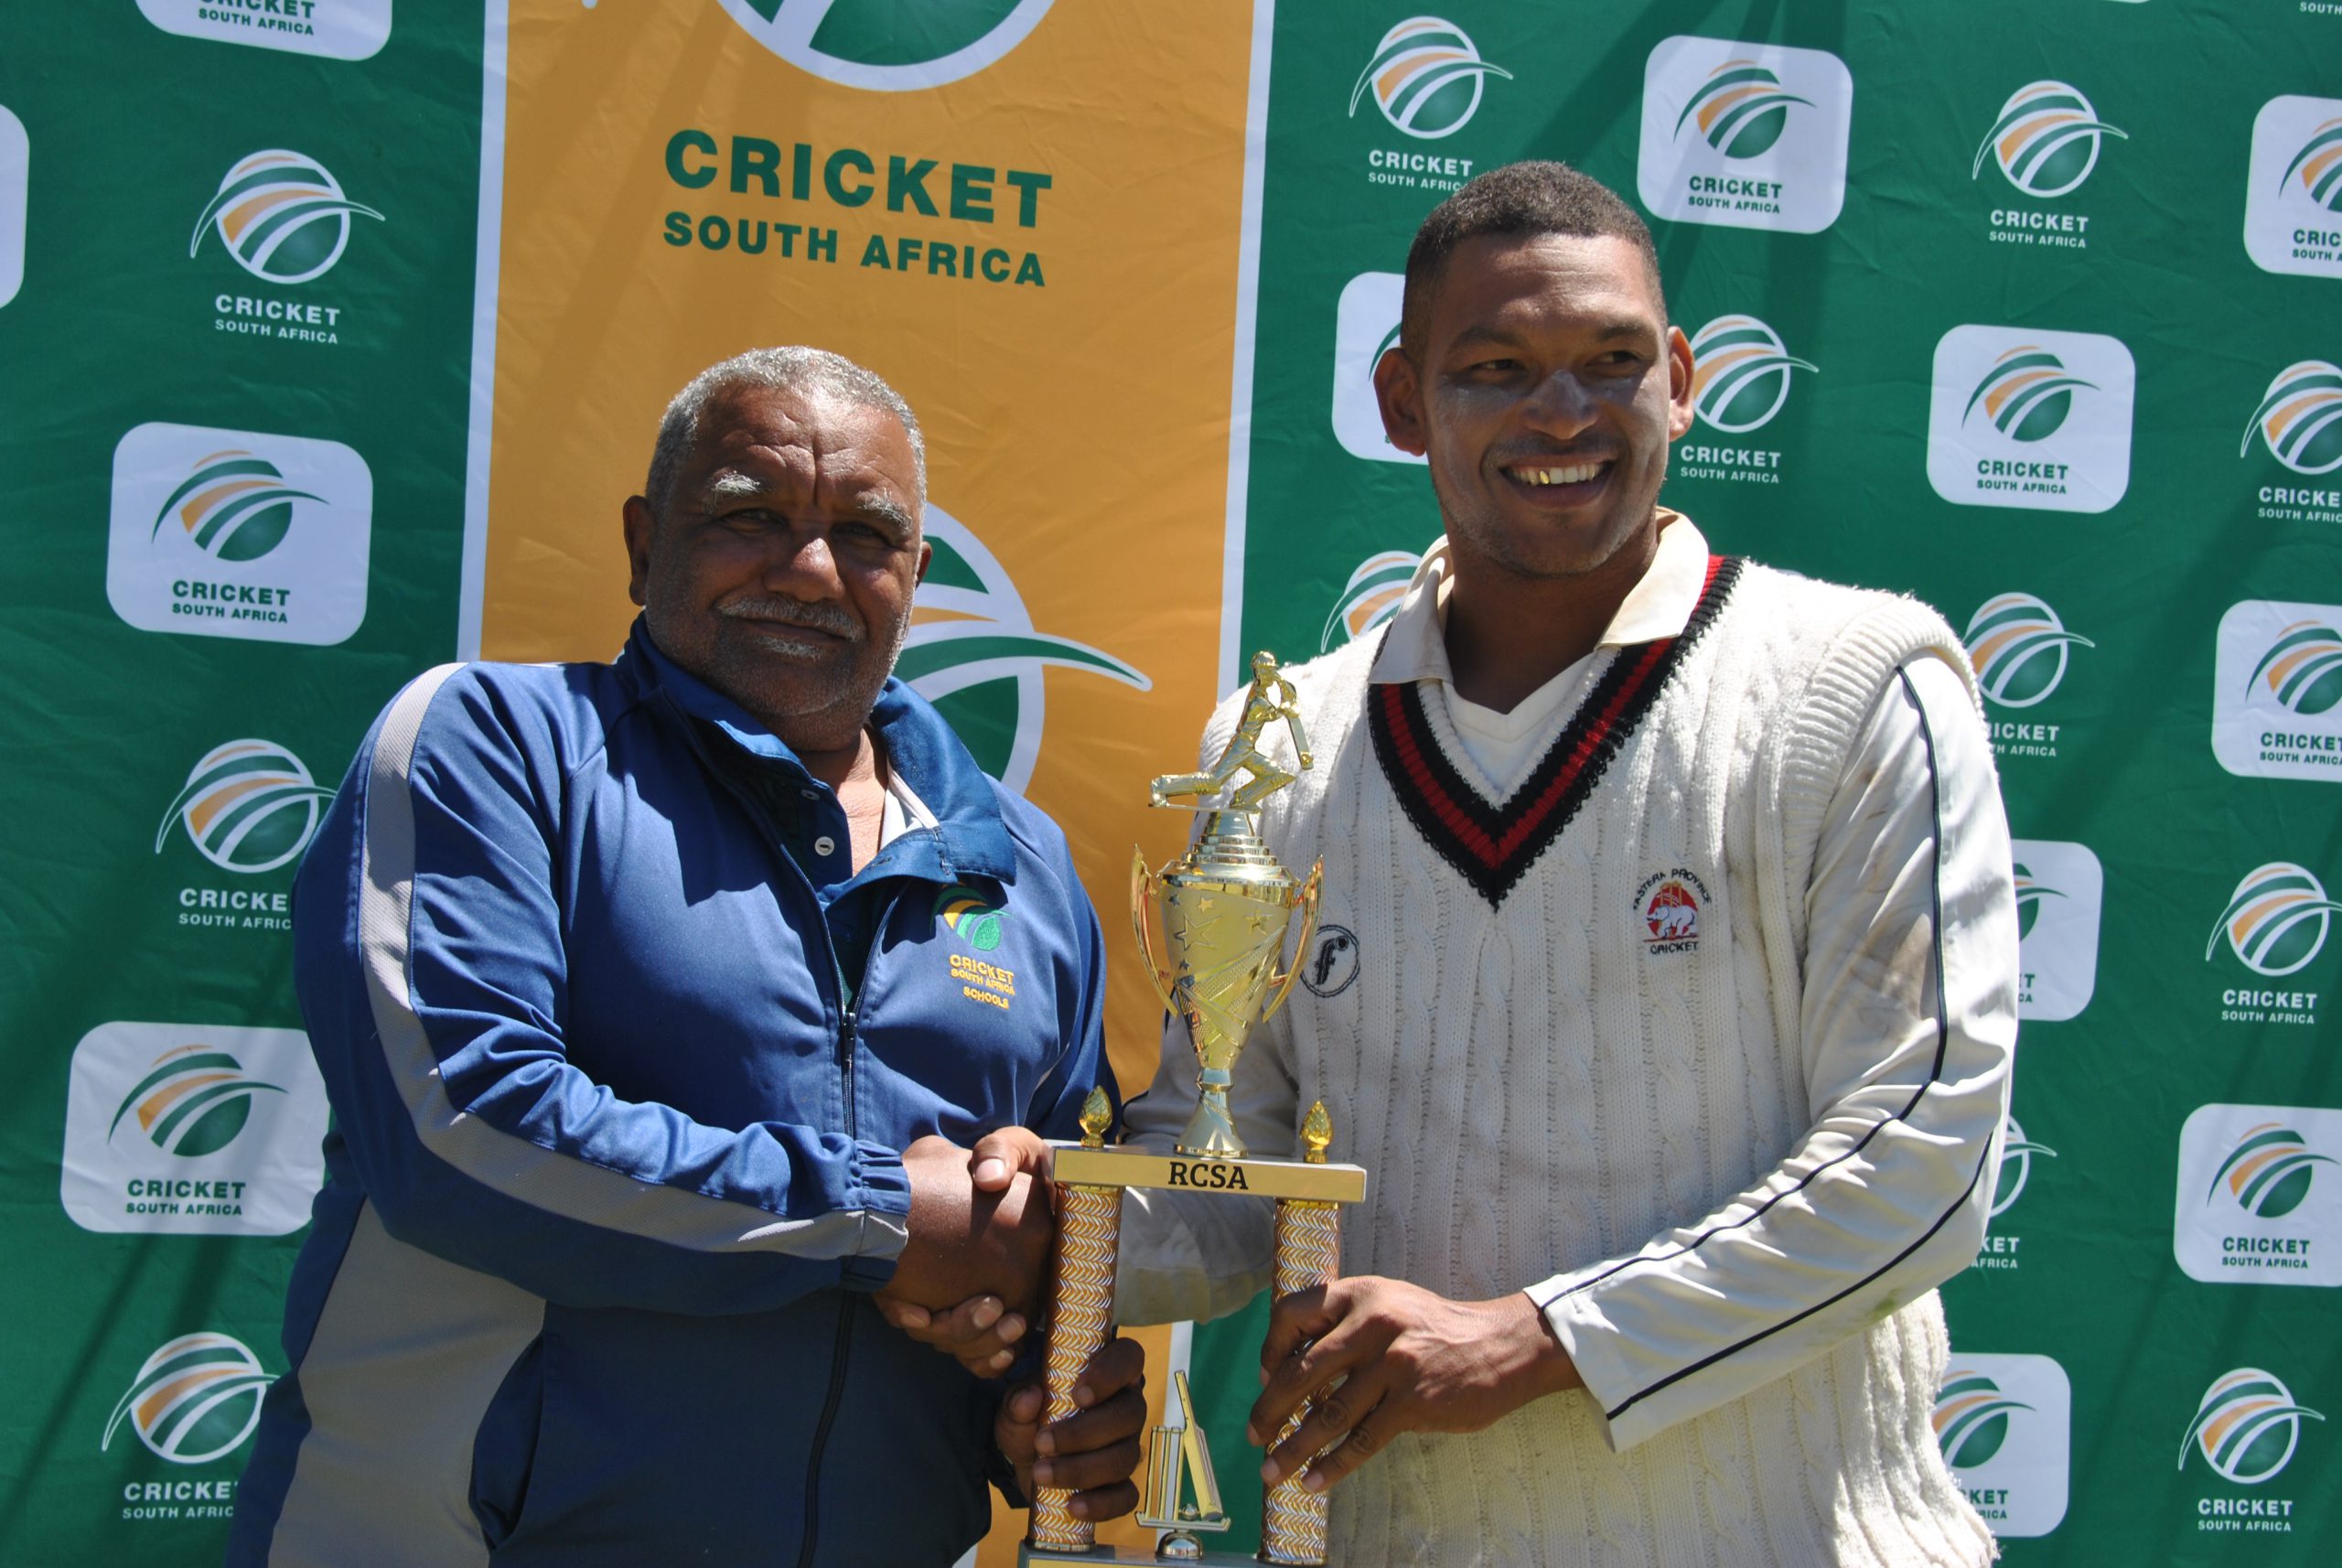 Leon Coetzee, President of Rural Cricket South Africa (left) handing over winners Trophy to Cariston Haarhoff (right), the victorious captain of EP. Photo: Daniels Media